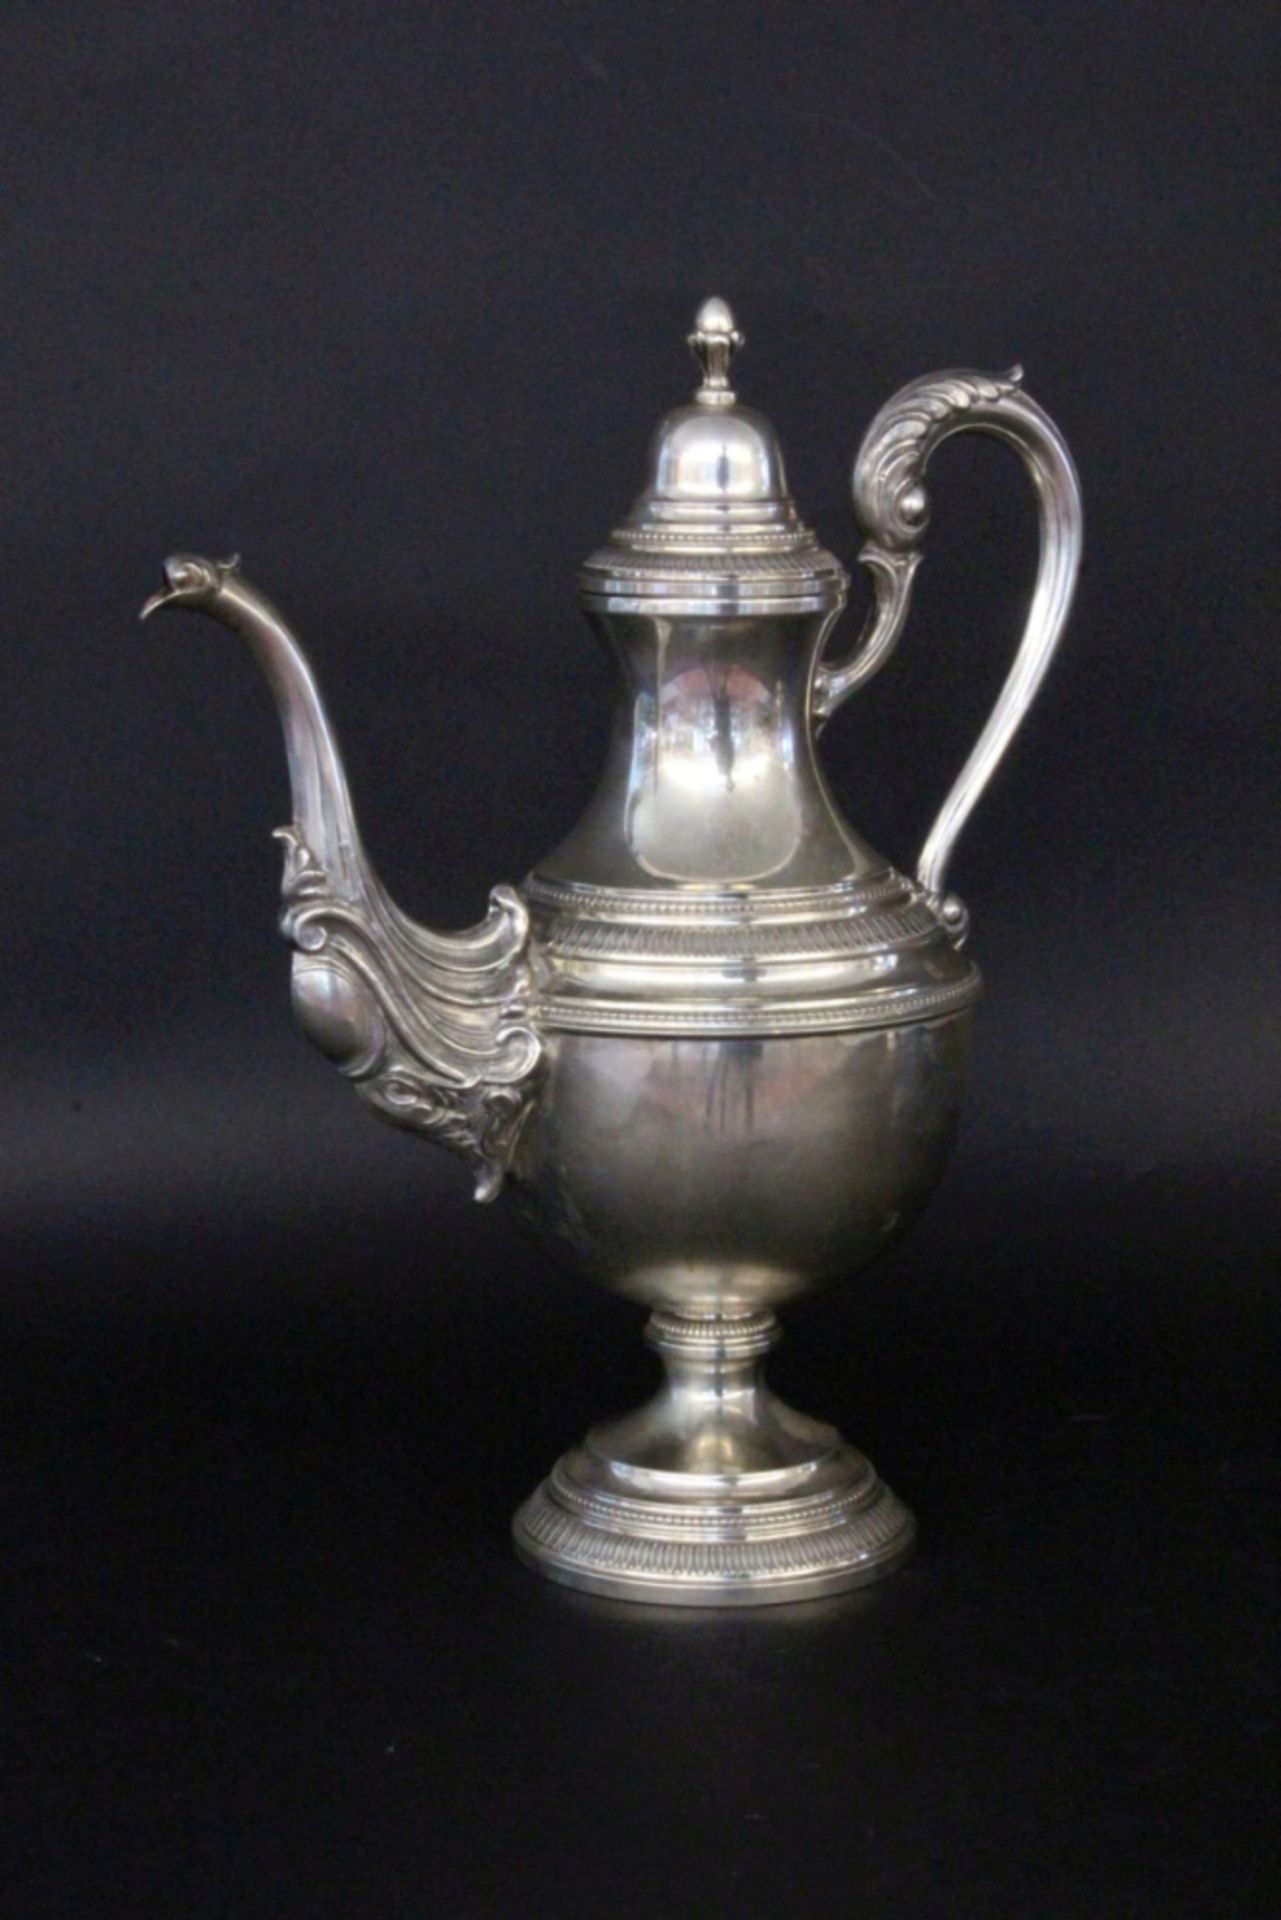 A COFFEE POT Italy, after 1900 Silver 800. Hallmarked. 28.5 cm high, approx. 685 grams.